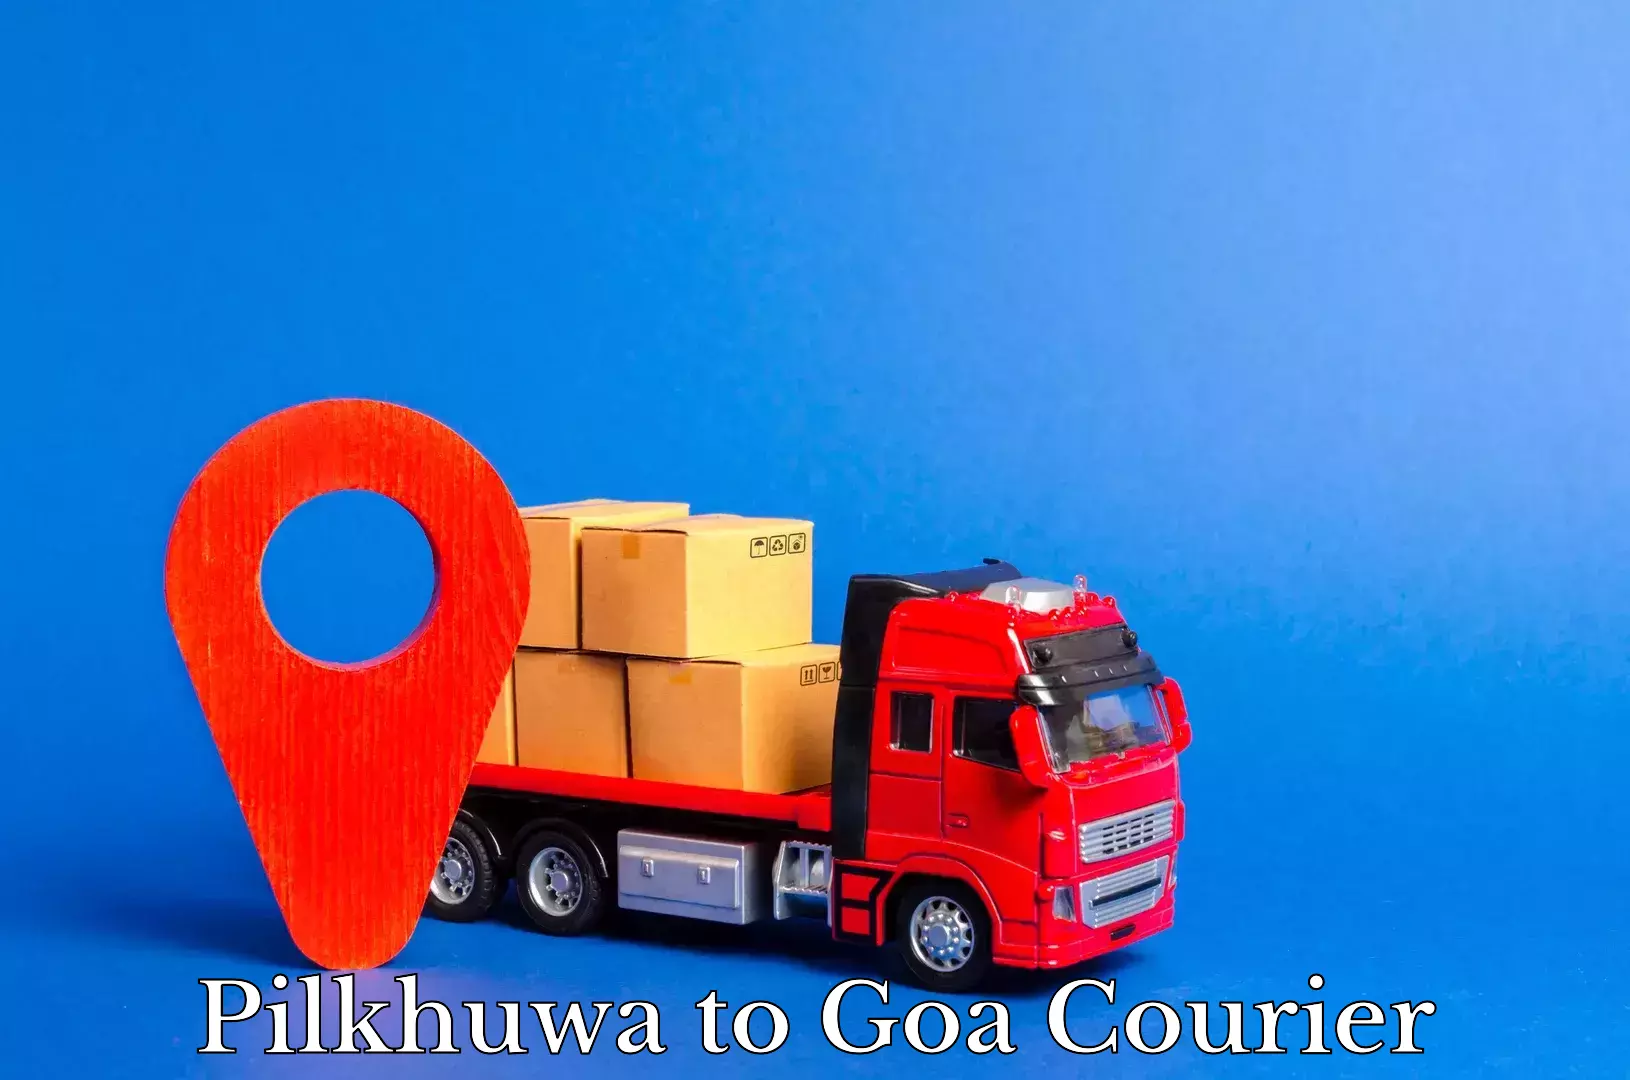 Reliable courier service Pilkhuwa to Goa